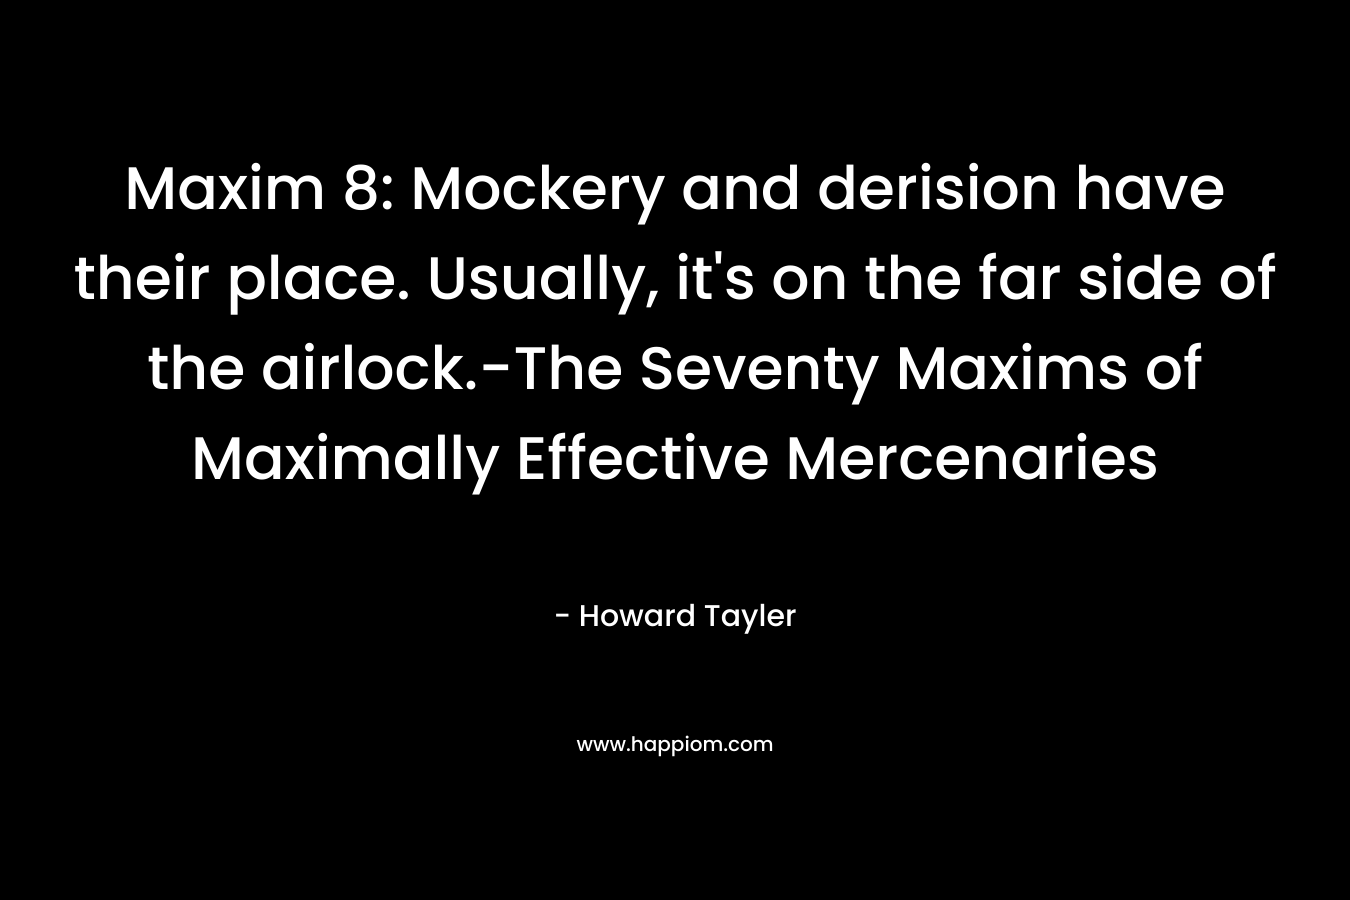 Maxim 8: Mockery and derision have their place. Usually, it's on the far side of the airlock.-The Seventy Maxims of Maximally Effective Mercenaries